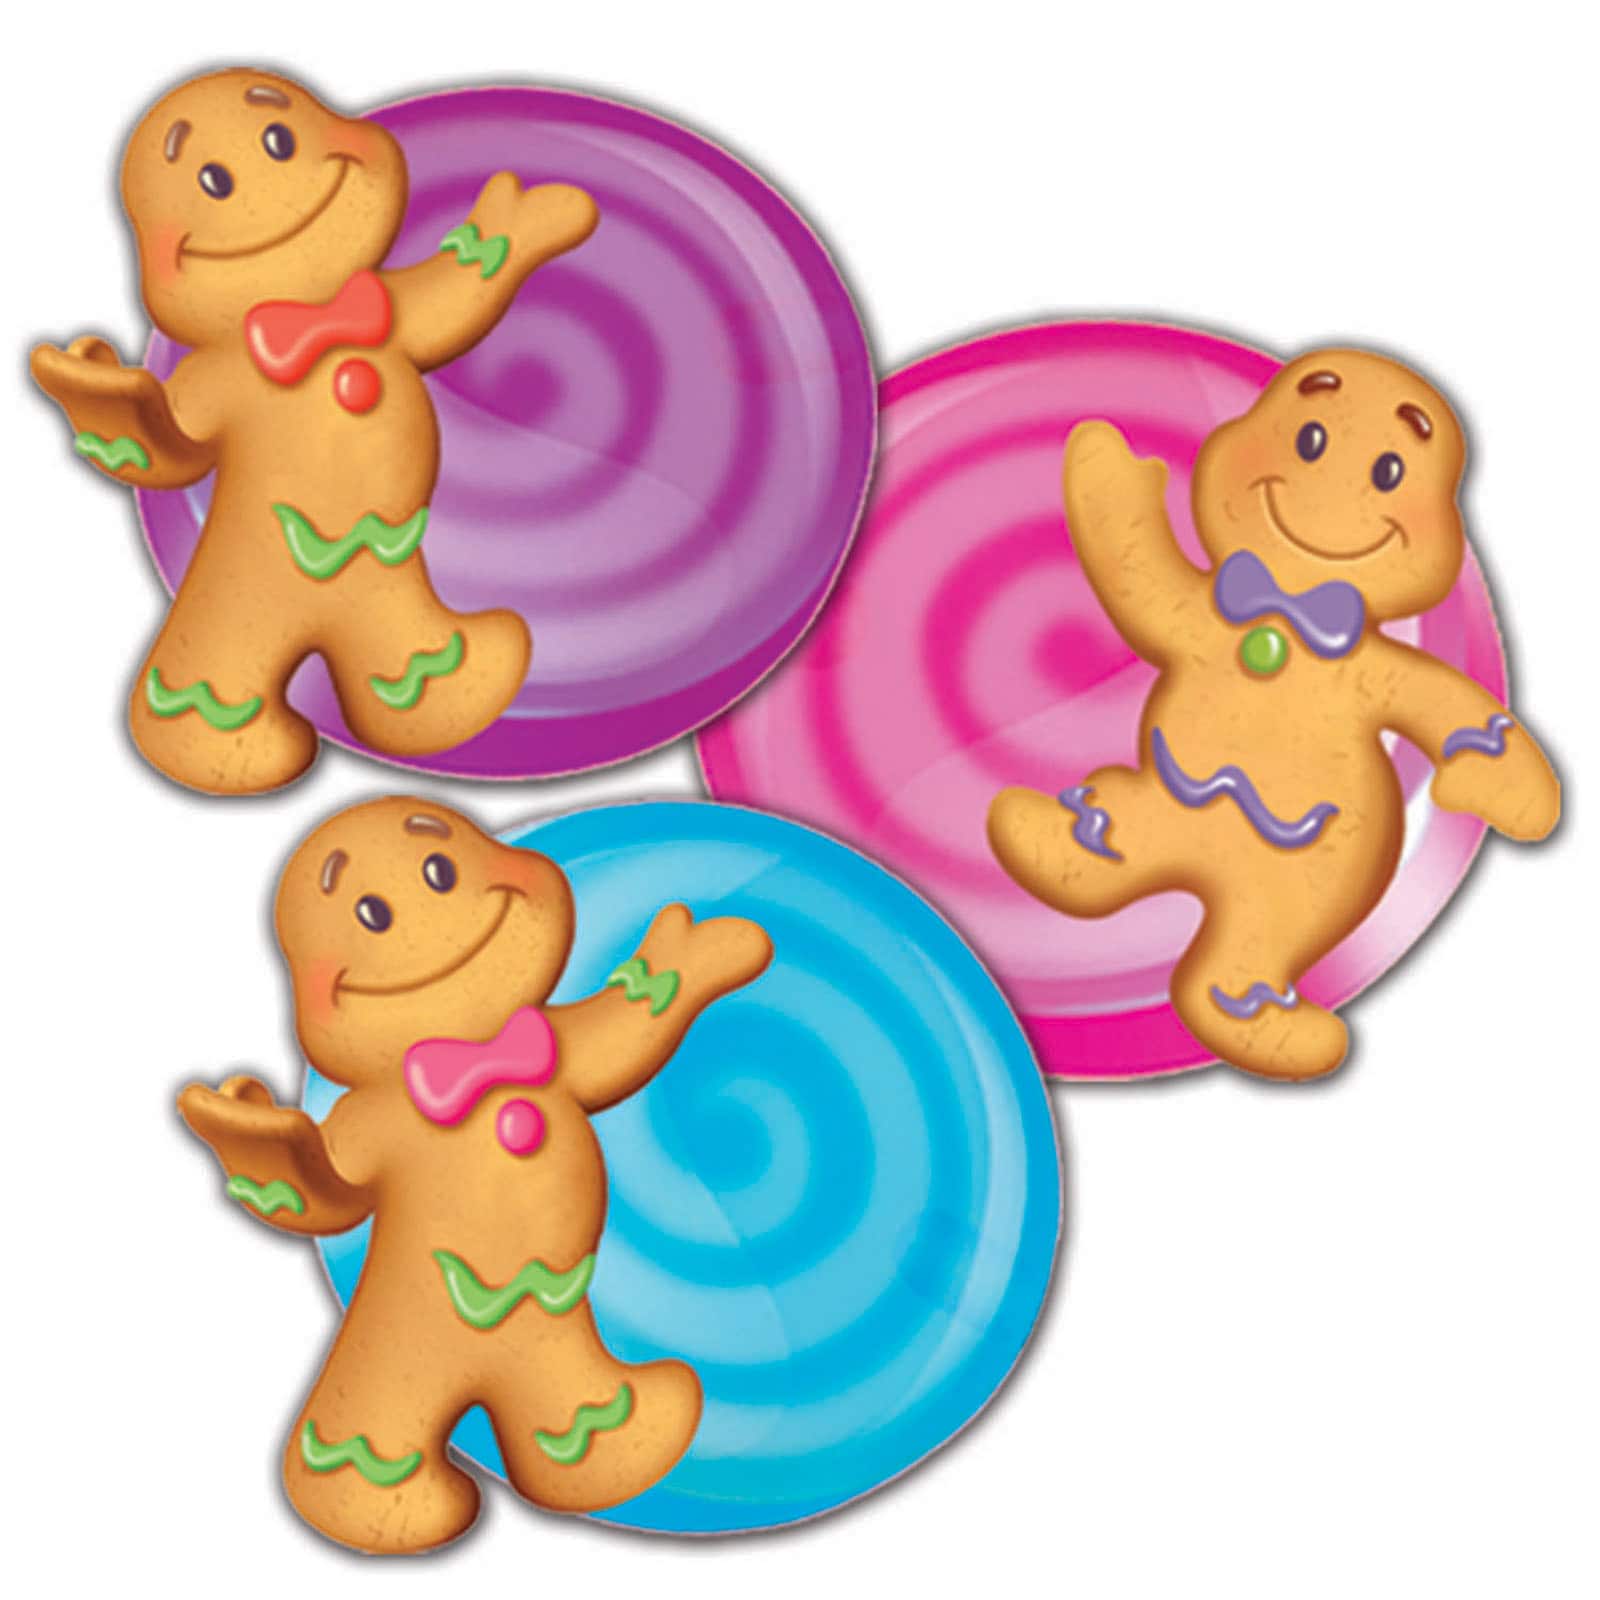 candyland characters pictures